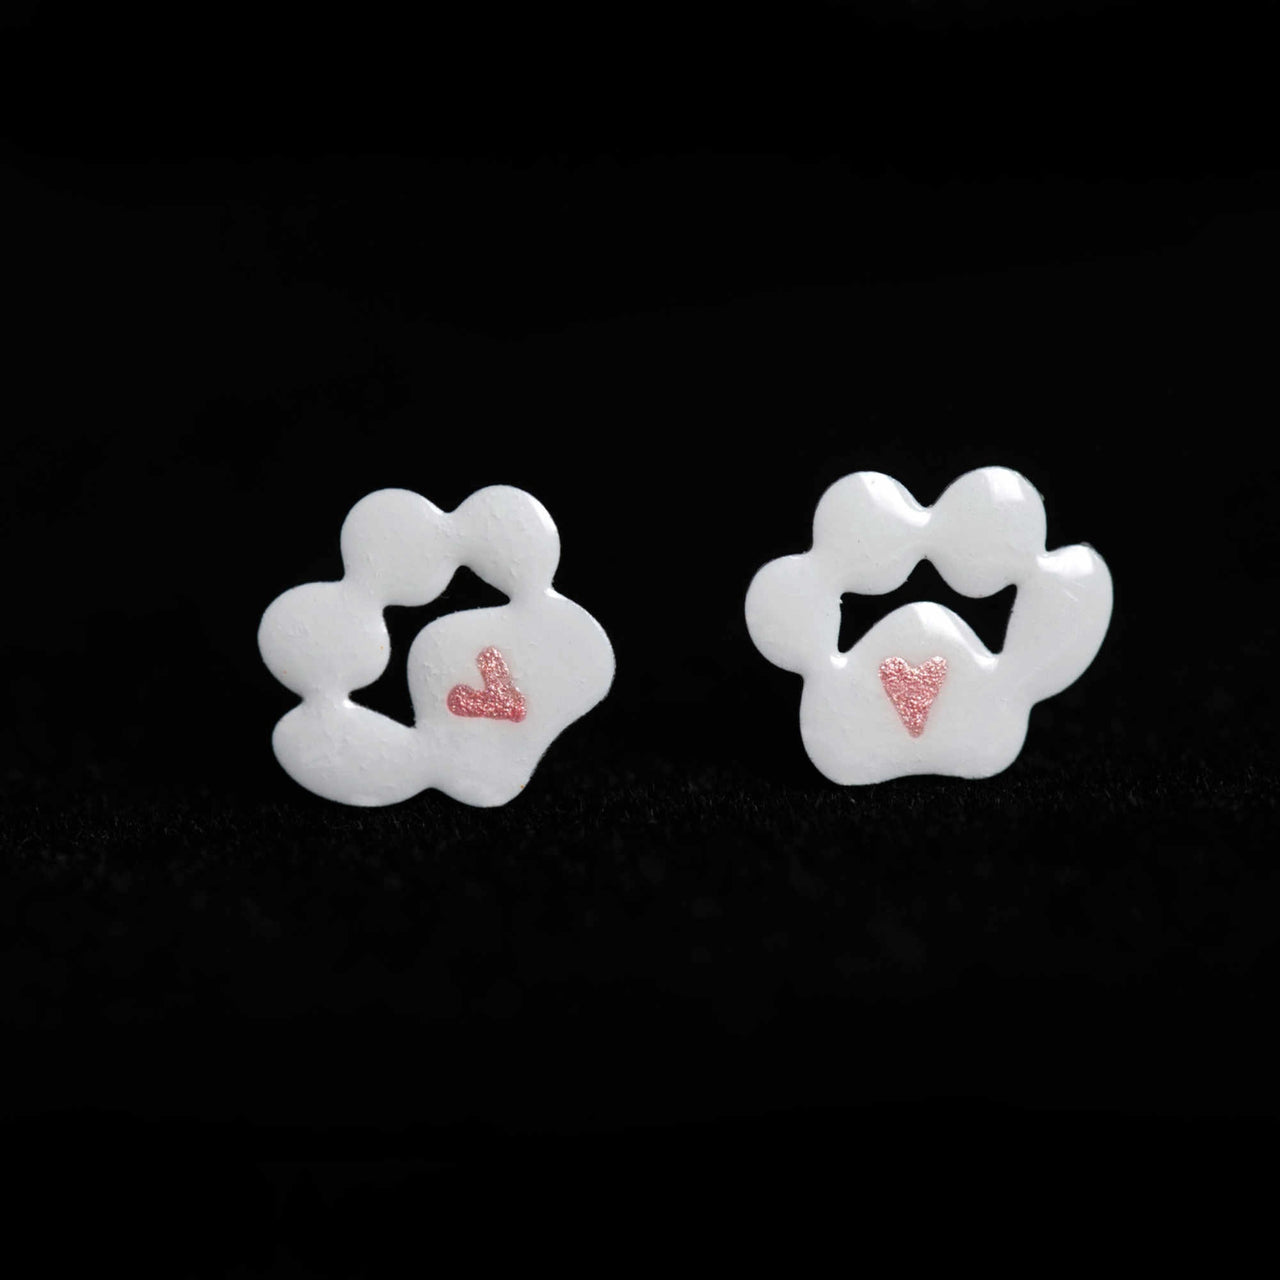 White paw earrings with a heart